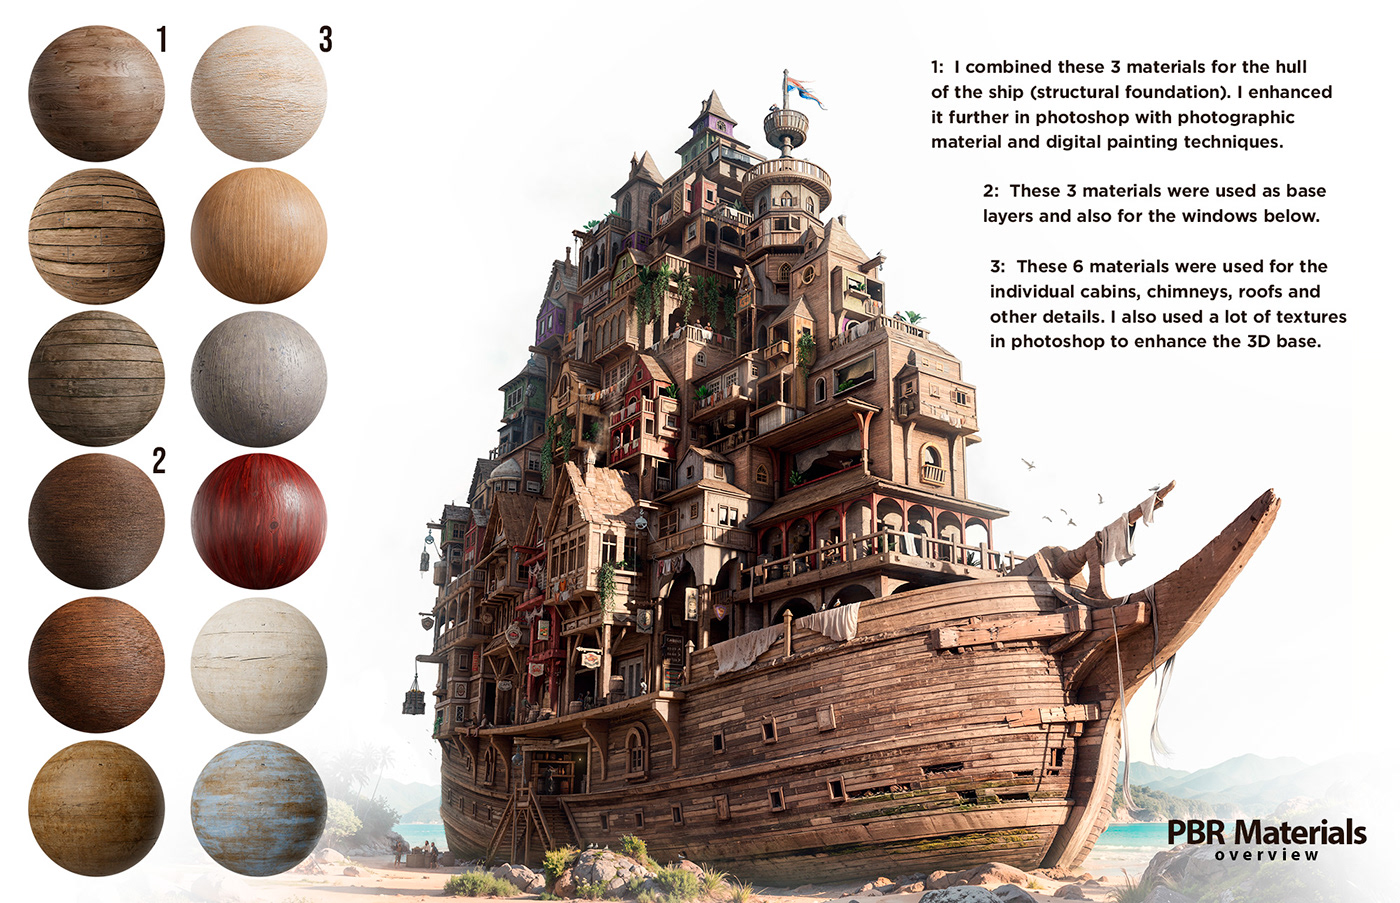 ship pirate jack sparrow Caribbean tropical island 海賊 old galleon old wooden ship Pirates of the Caribbean القرصان